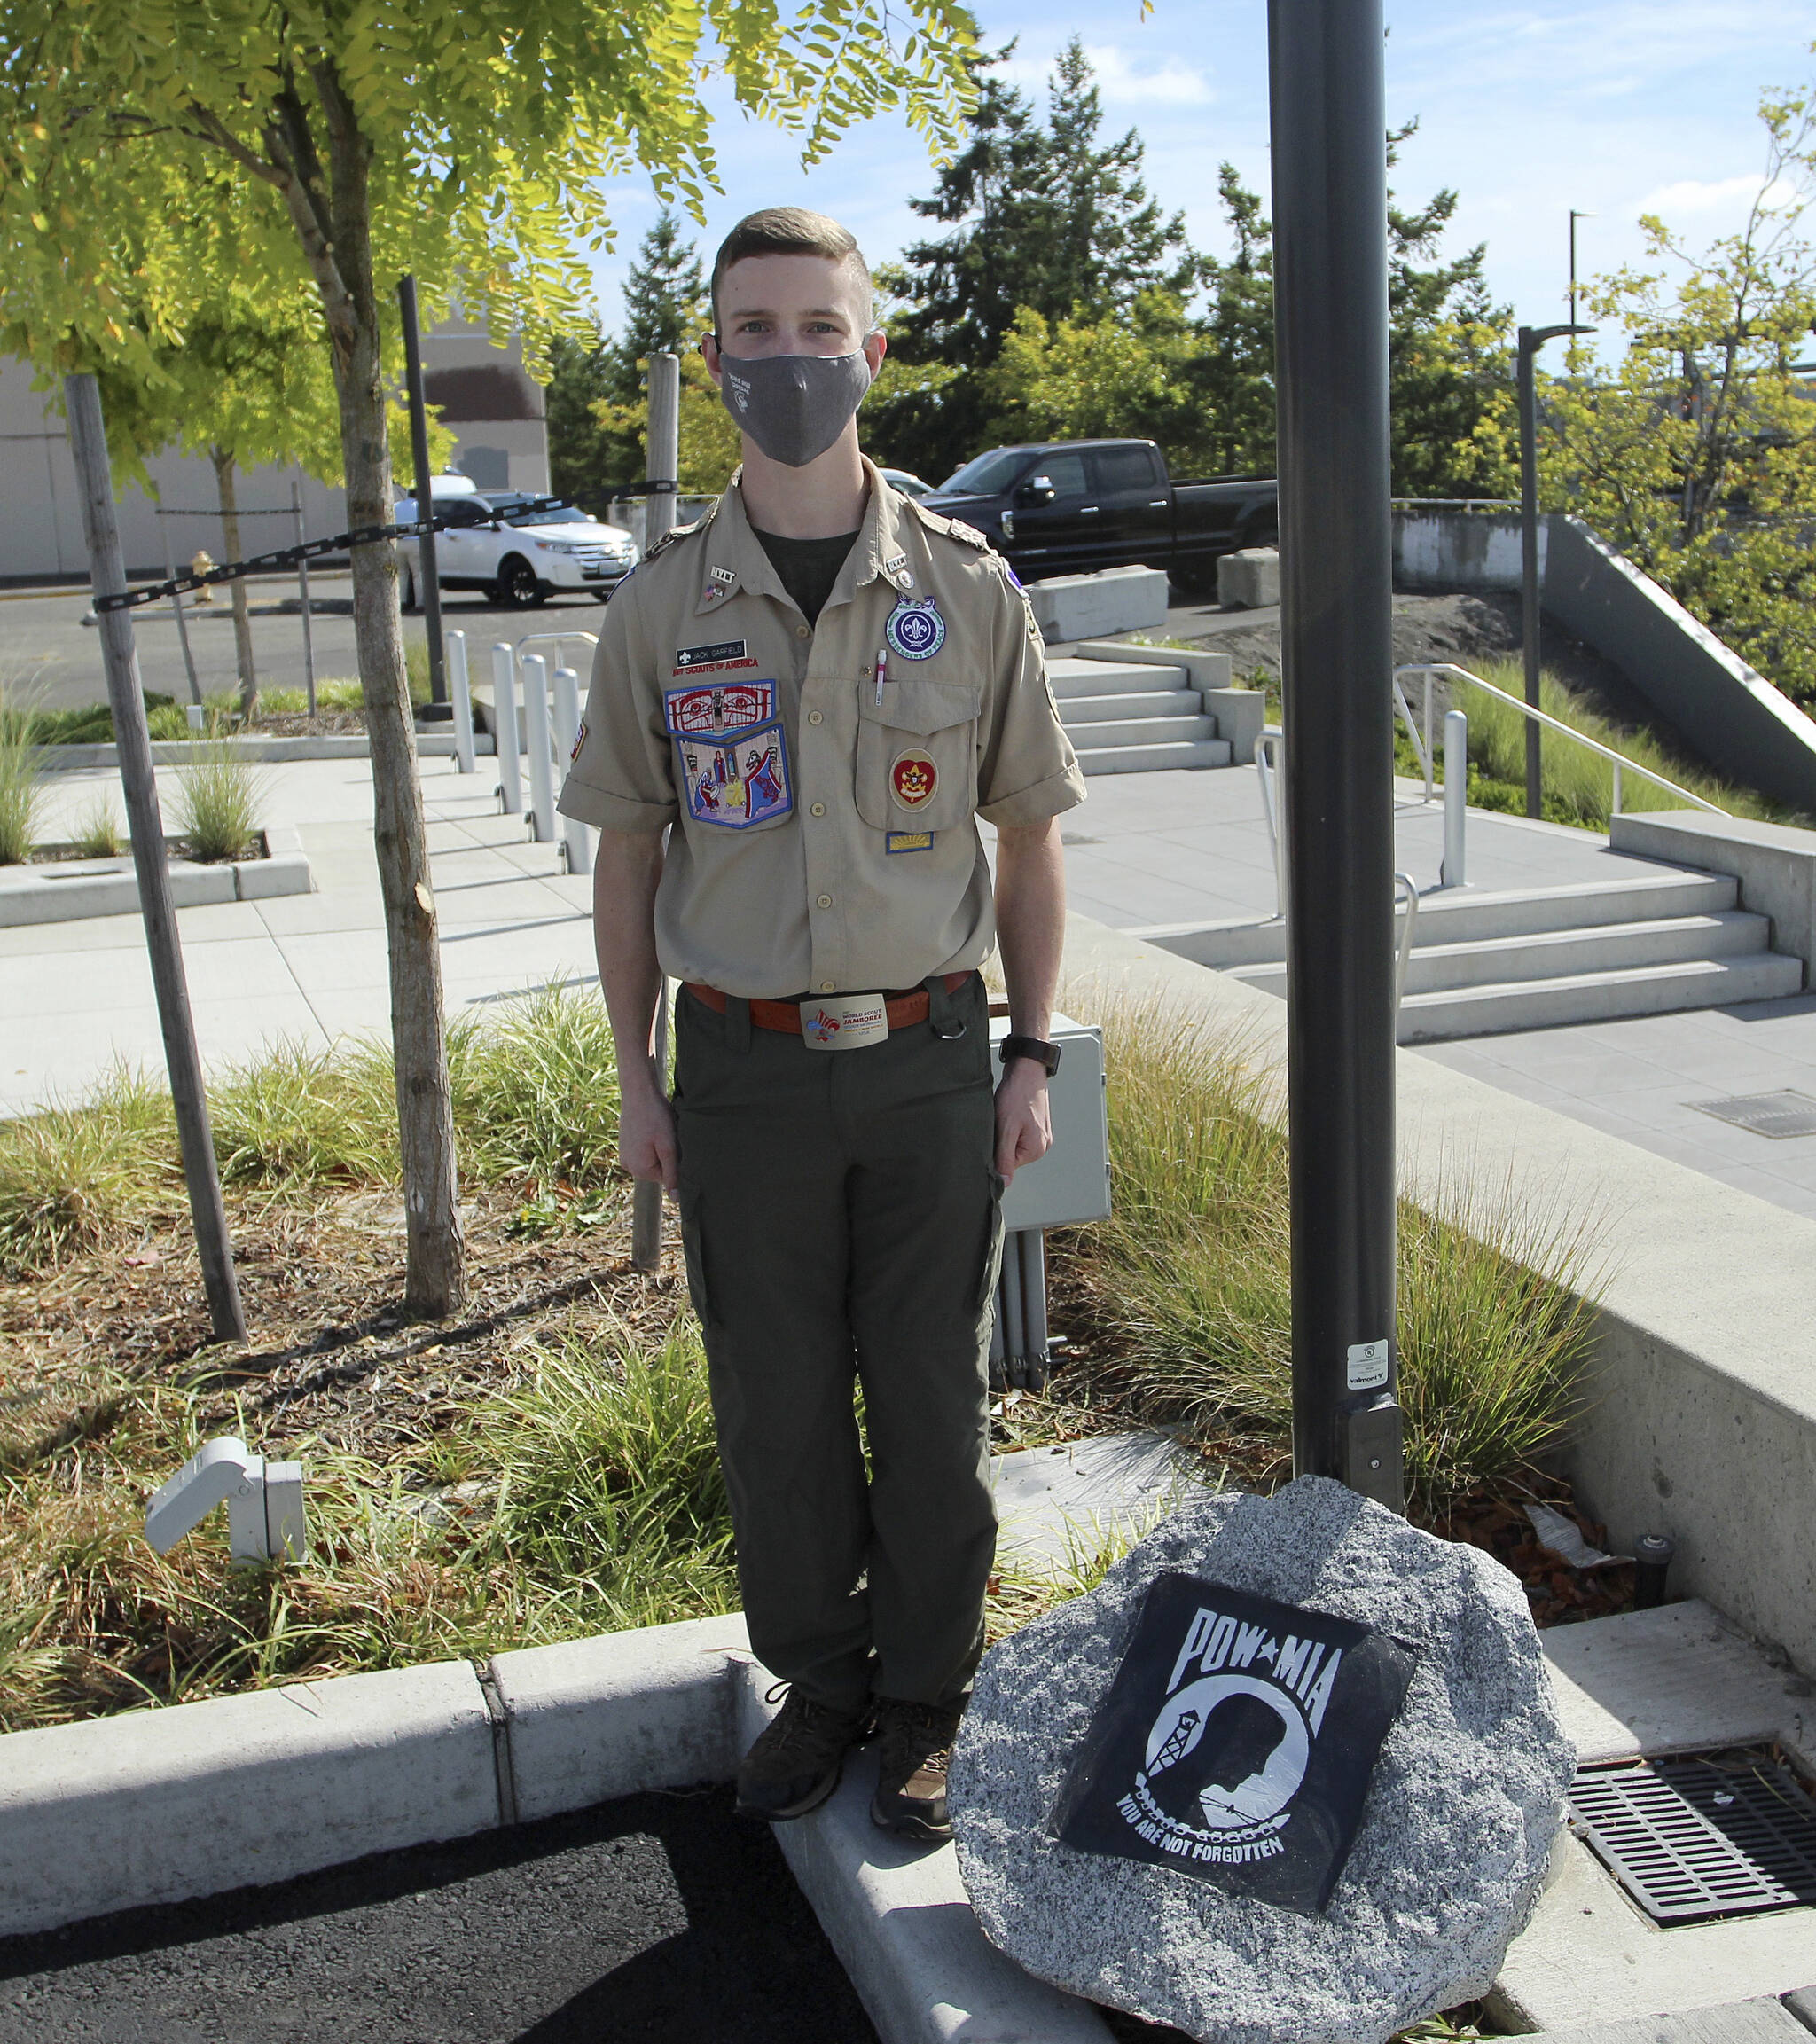 Jack Garfield, 17, carved and painted a stone at the veterans memorial to honor Prisoner of War (POW) or Missing in Action (MIA) service members. Olivia Sullivan/the Mirror